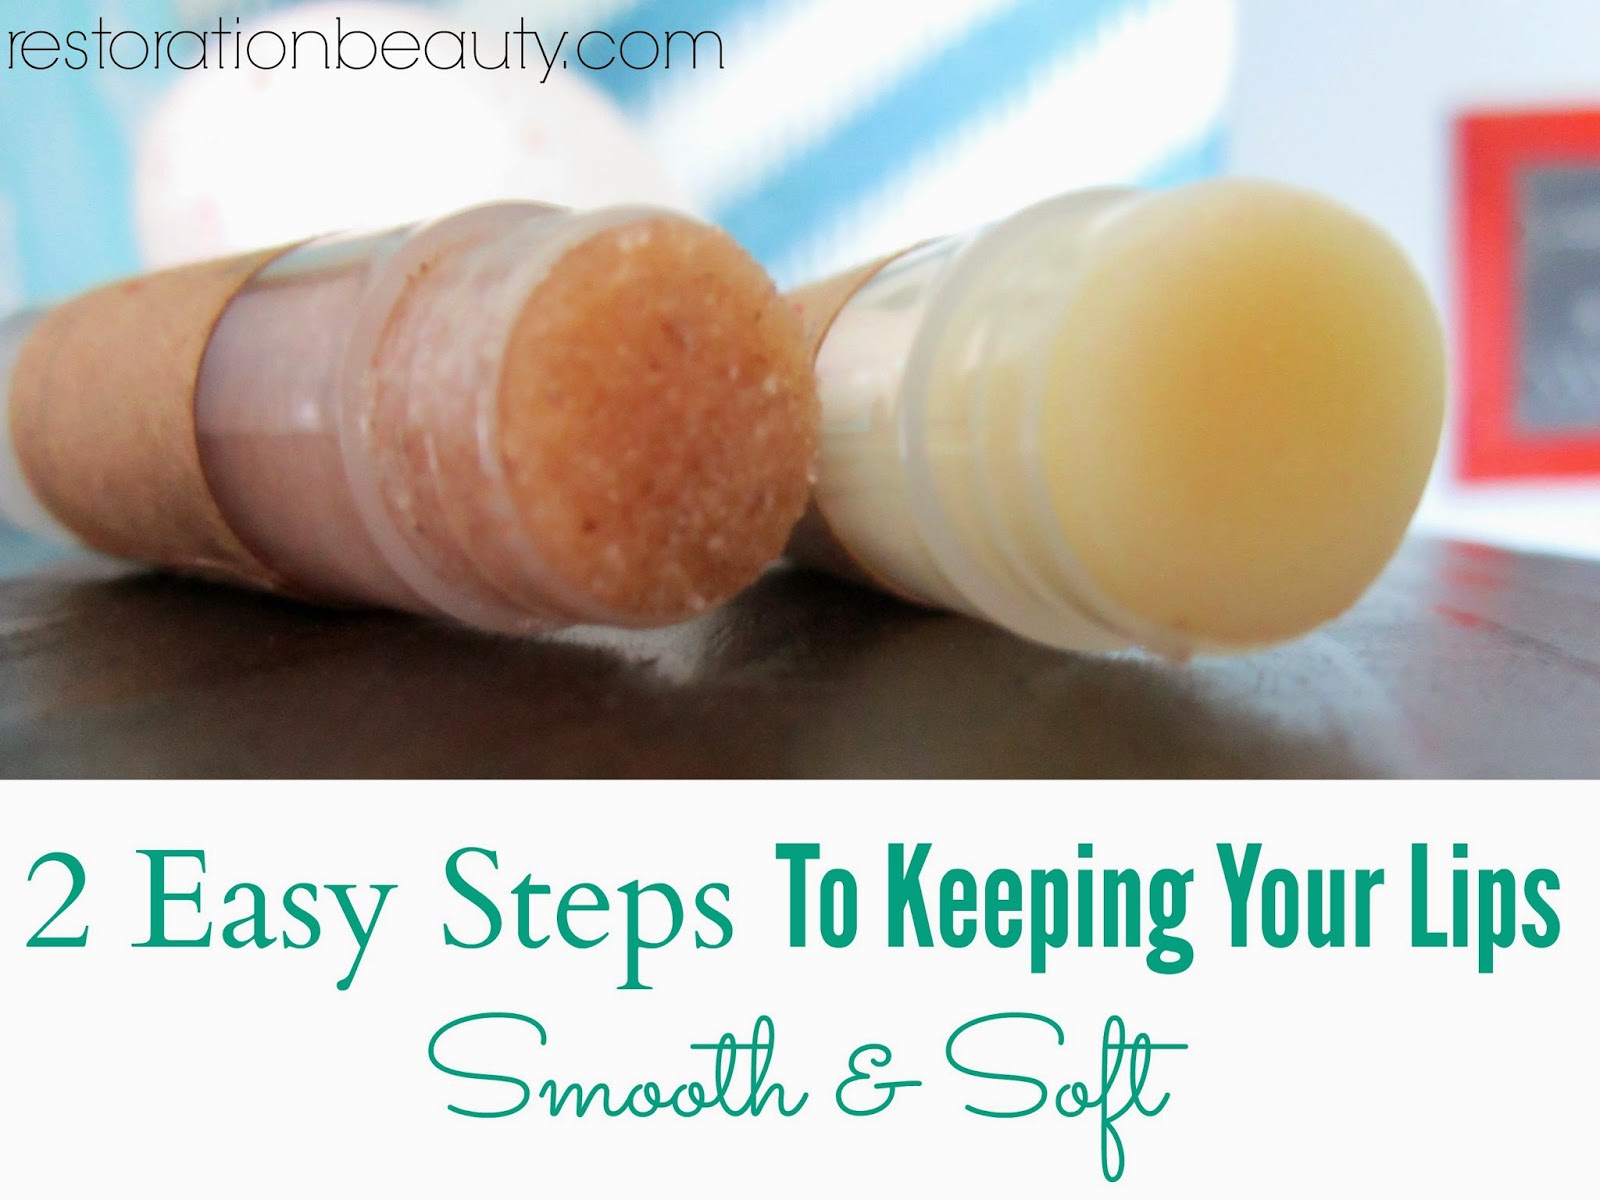 How can you make your lips soft?